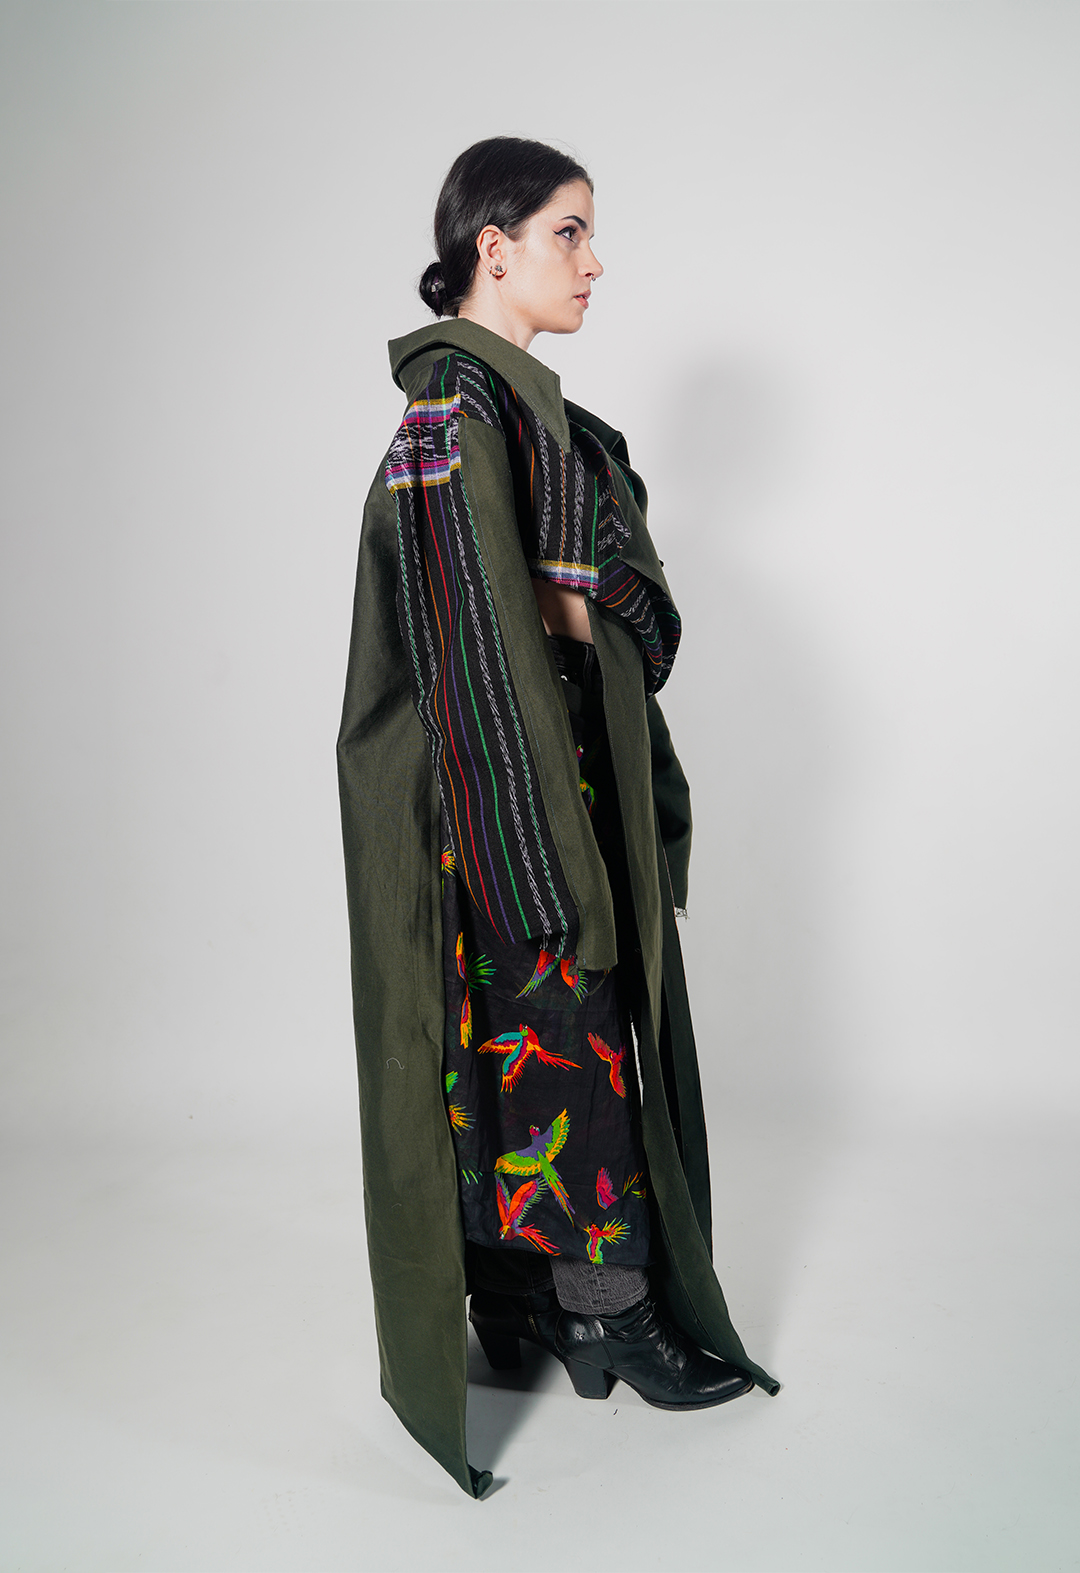 Side view of a colorful artisanal Mayan textile deconstructed trench and matching skirt in army-green silk wool. I draw from the vibrant textiles of Guatemala to create pieces that represent the strength and cultural identity of the Mayan people amid the dissolution of their homelands.